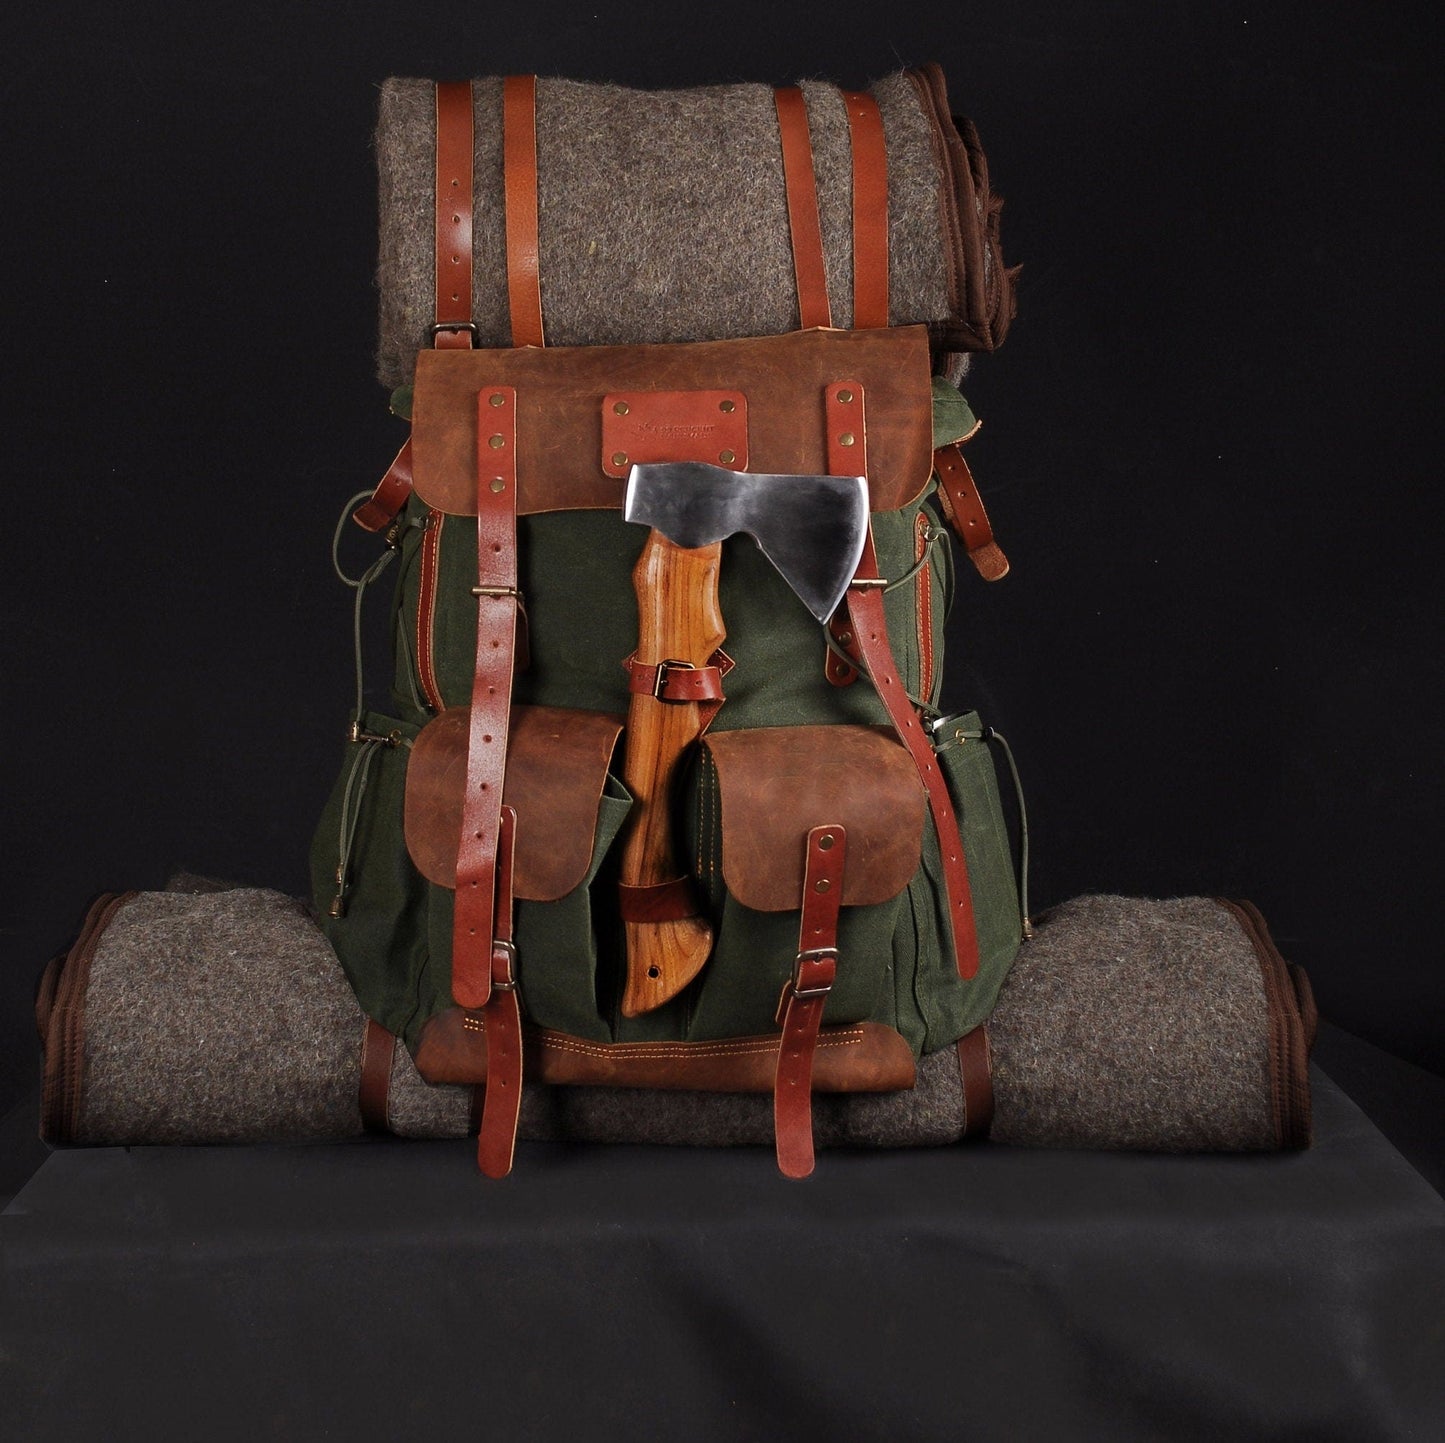 30L to 80L  | Brown | Bushcraft  | Camping  | Hiking | Rucksack | Backpack | Outdoor Backpack | Personalization bushcraft - camping - hiking backpack 99percenthandmade   